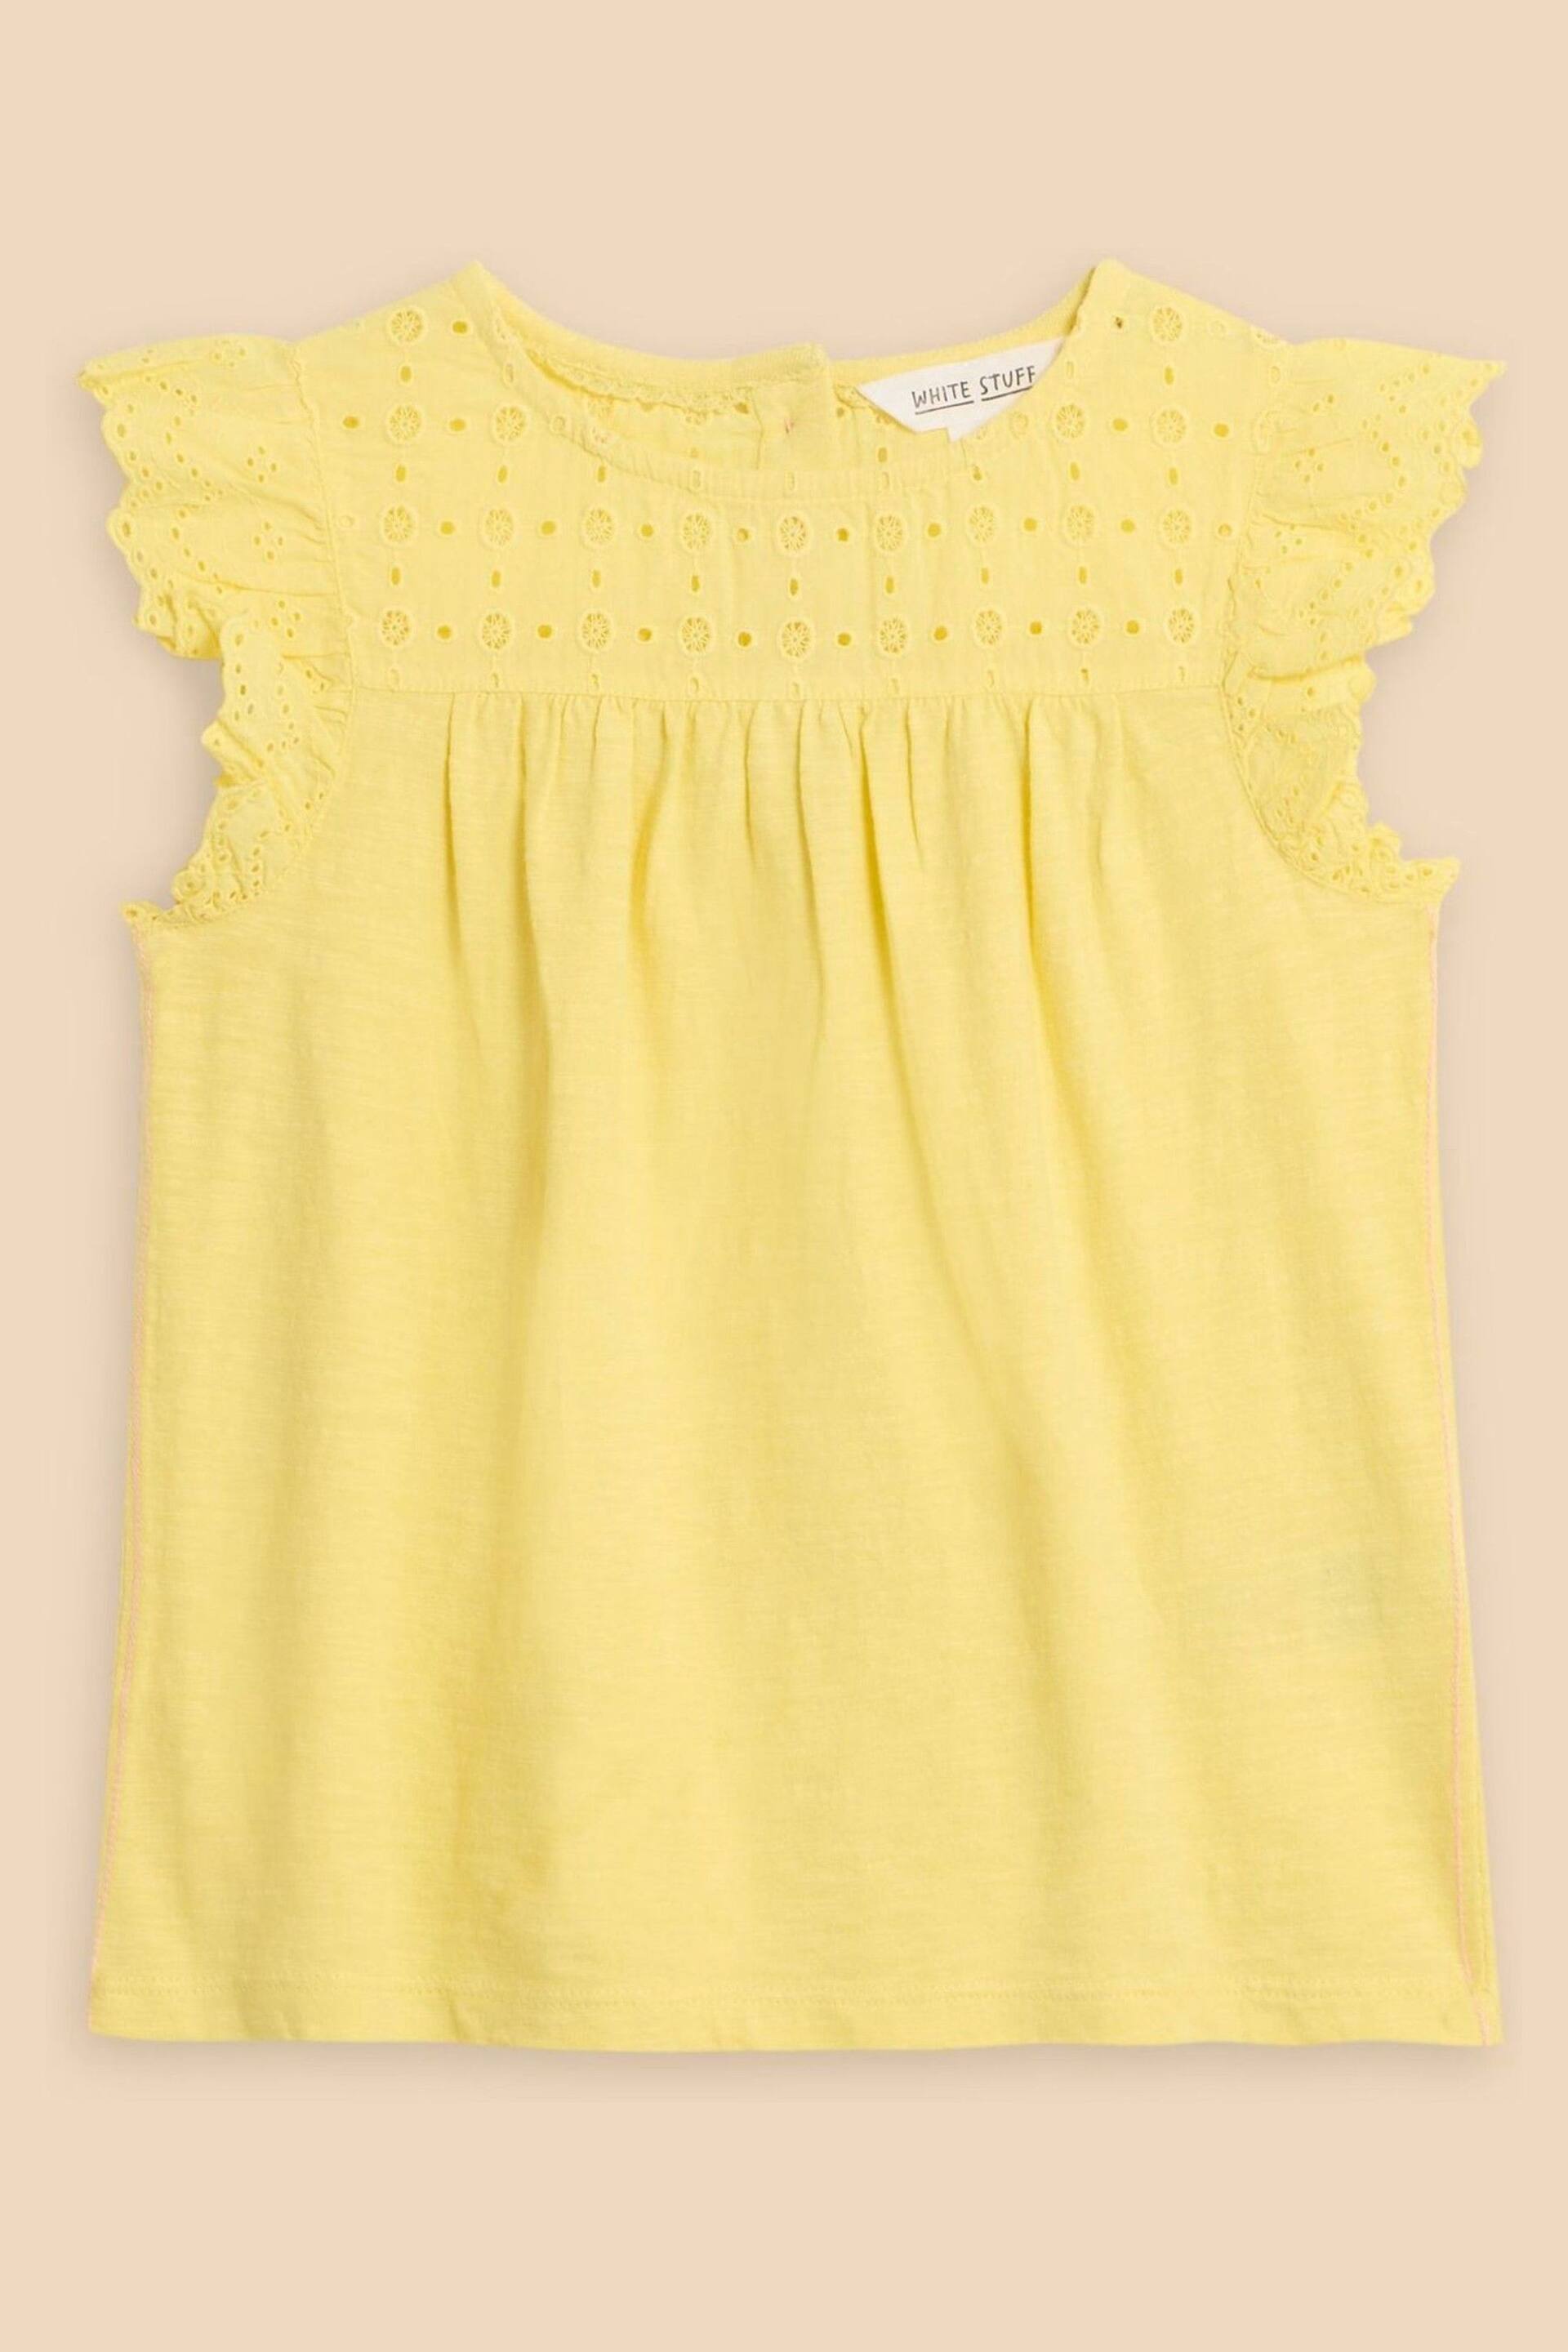 White Stuff Yellow Broderie Top - Image 1 of 3